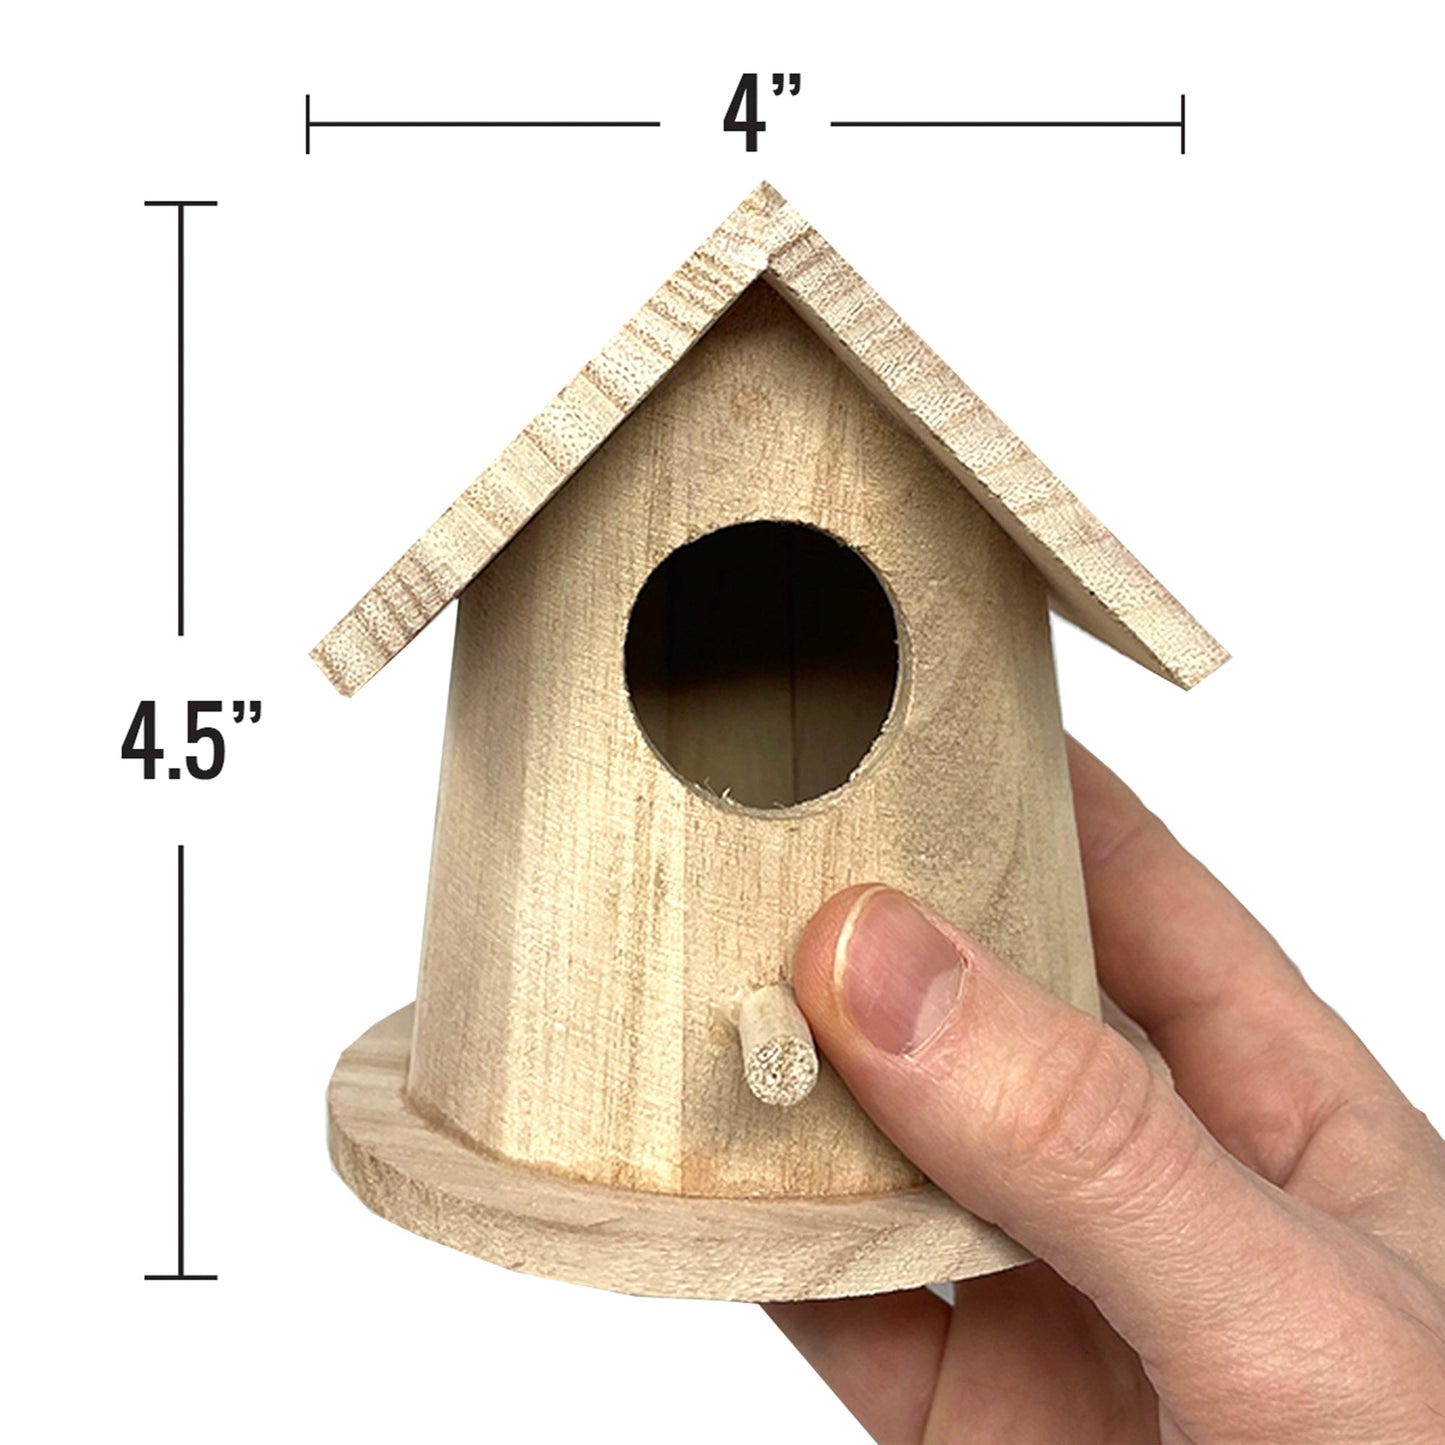 PIXISS Wooden Birdhouses Set of 6 by Pixiss